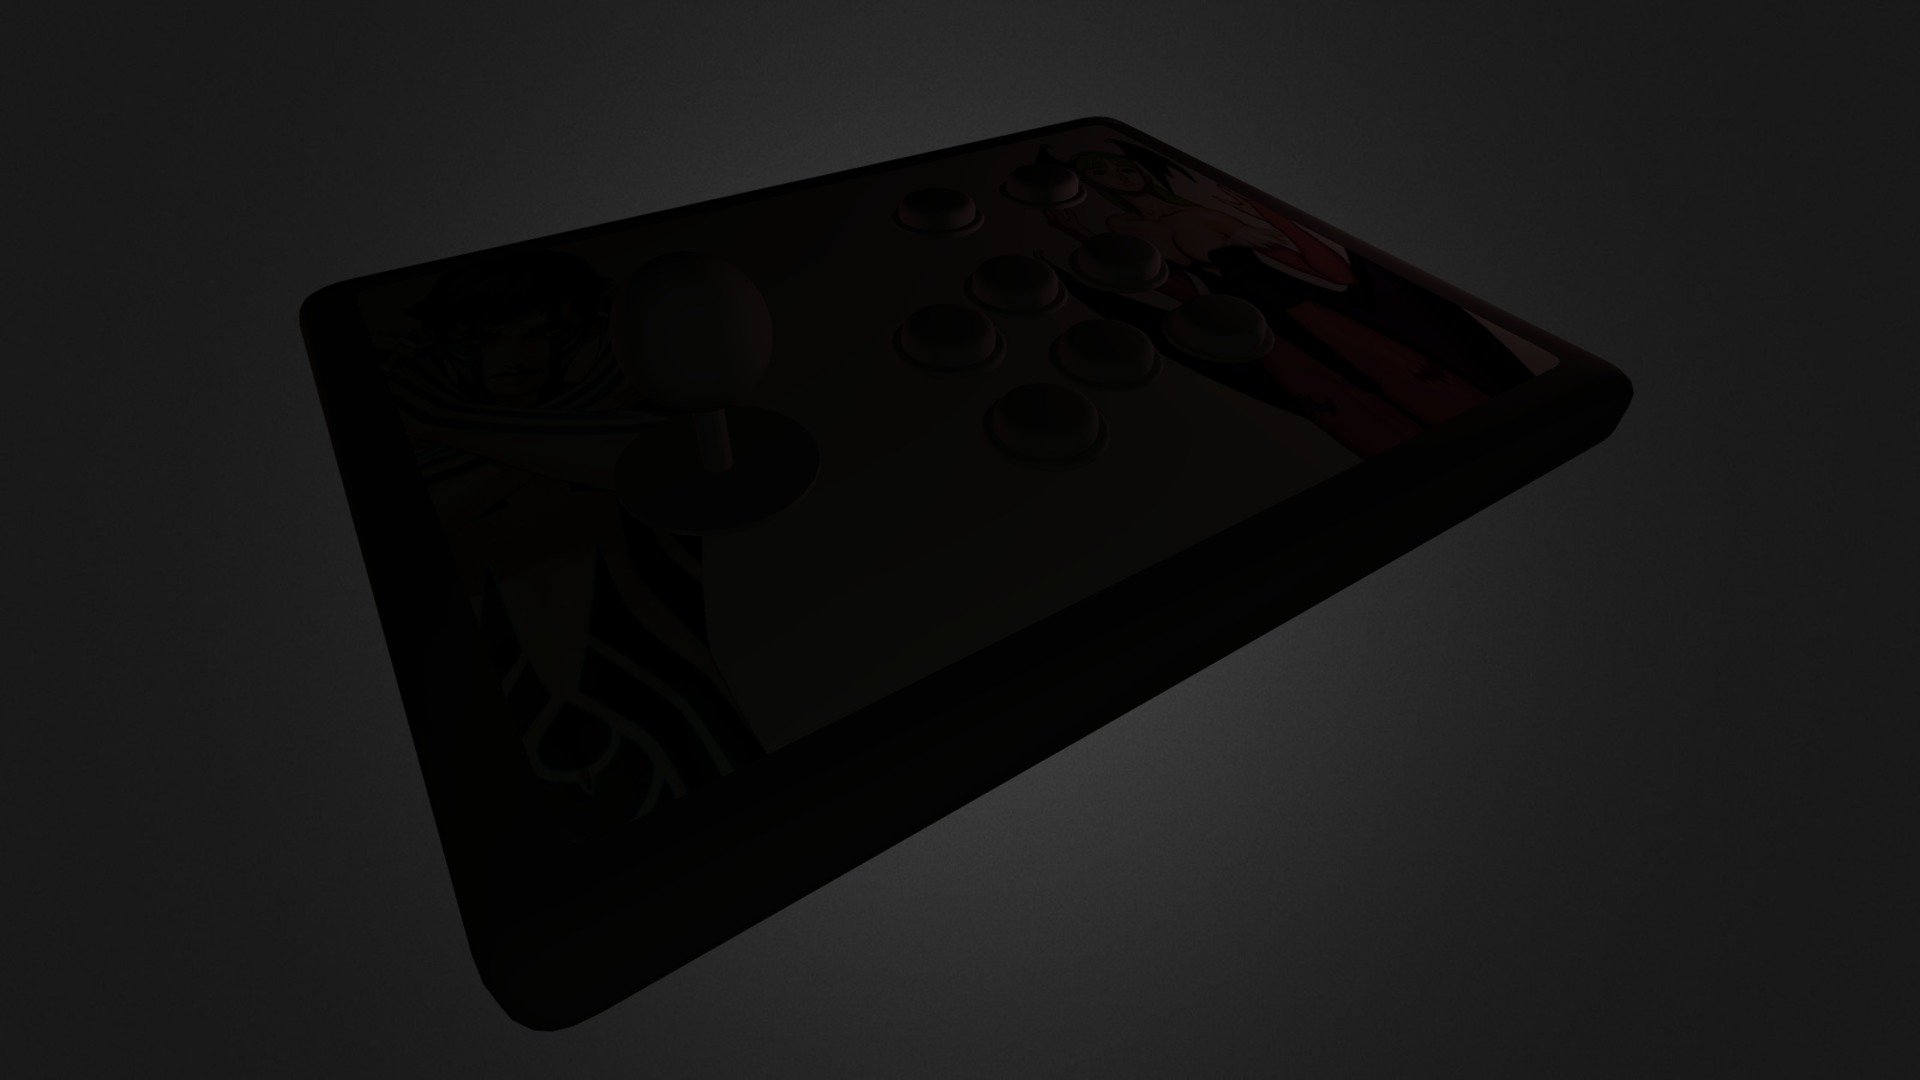 fight-stick-3d-model-by-engames-e152f42-sketchfab